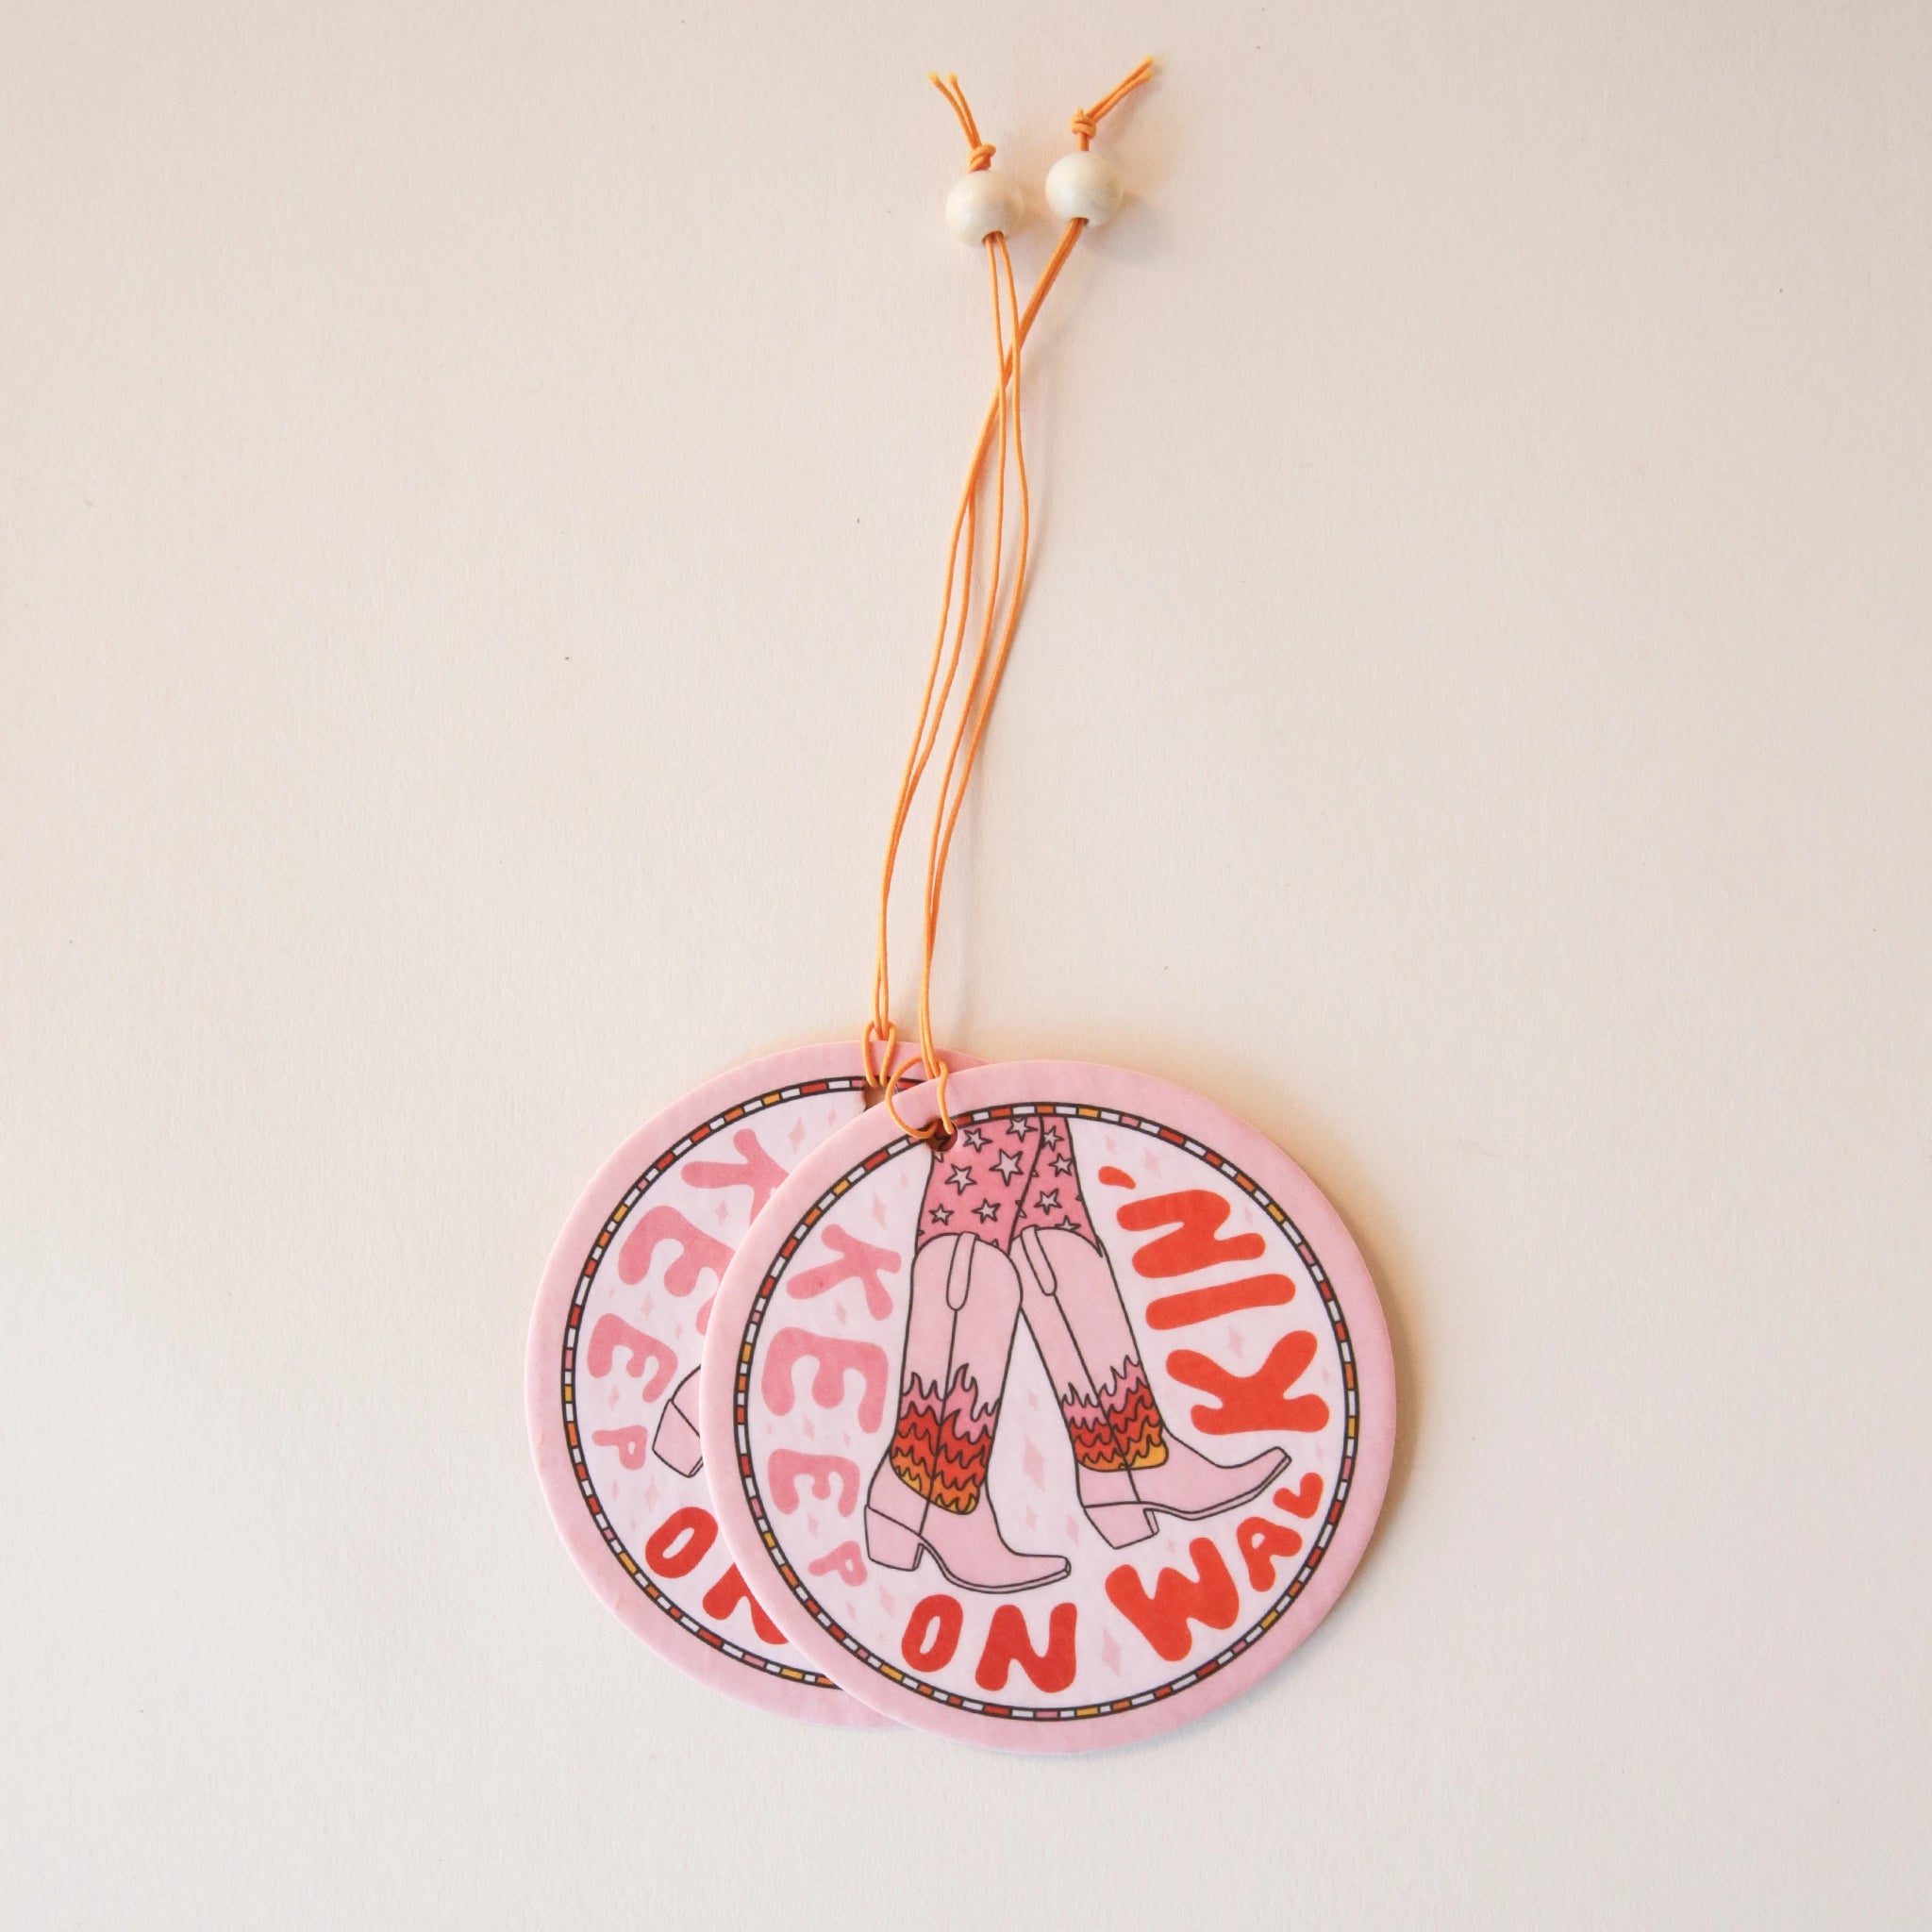 A light pink circle air freshener with a elastic loop for hanging and a cowgirl boot graphic with fire details on them and text that reads, &quot;Keep On Walking&#39;&quot; in keep and red text around the edge of the air freshener.